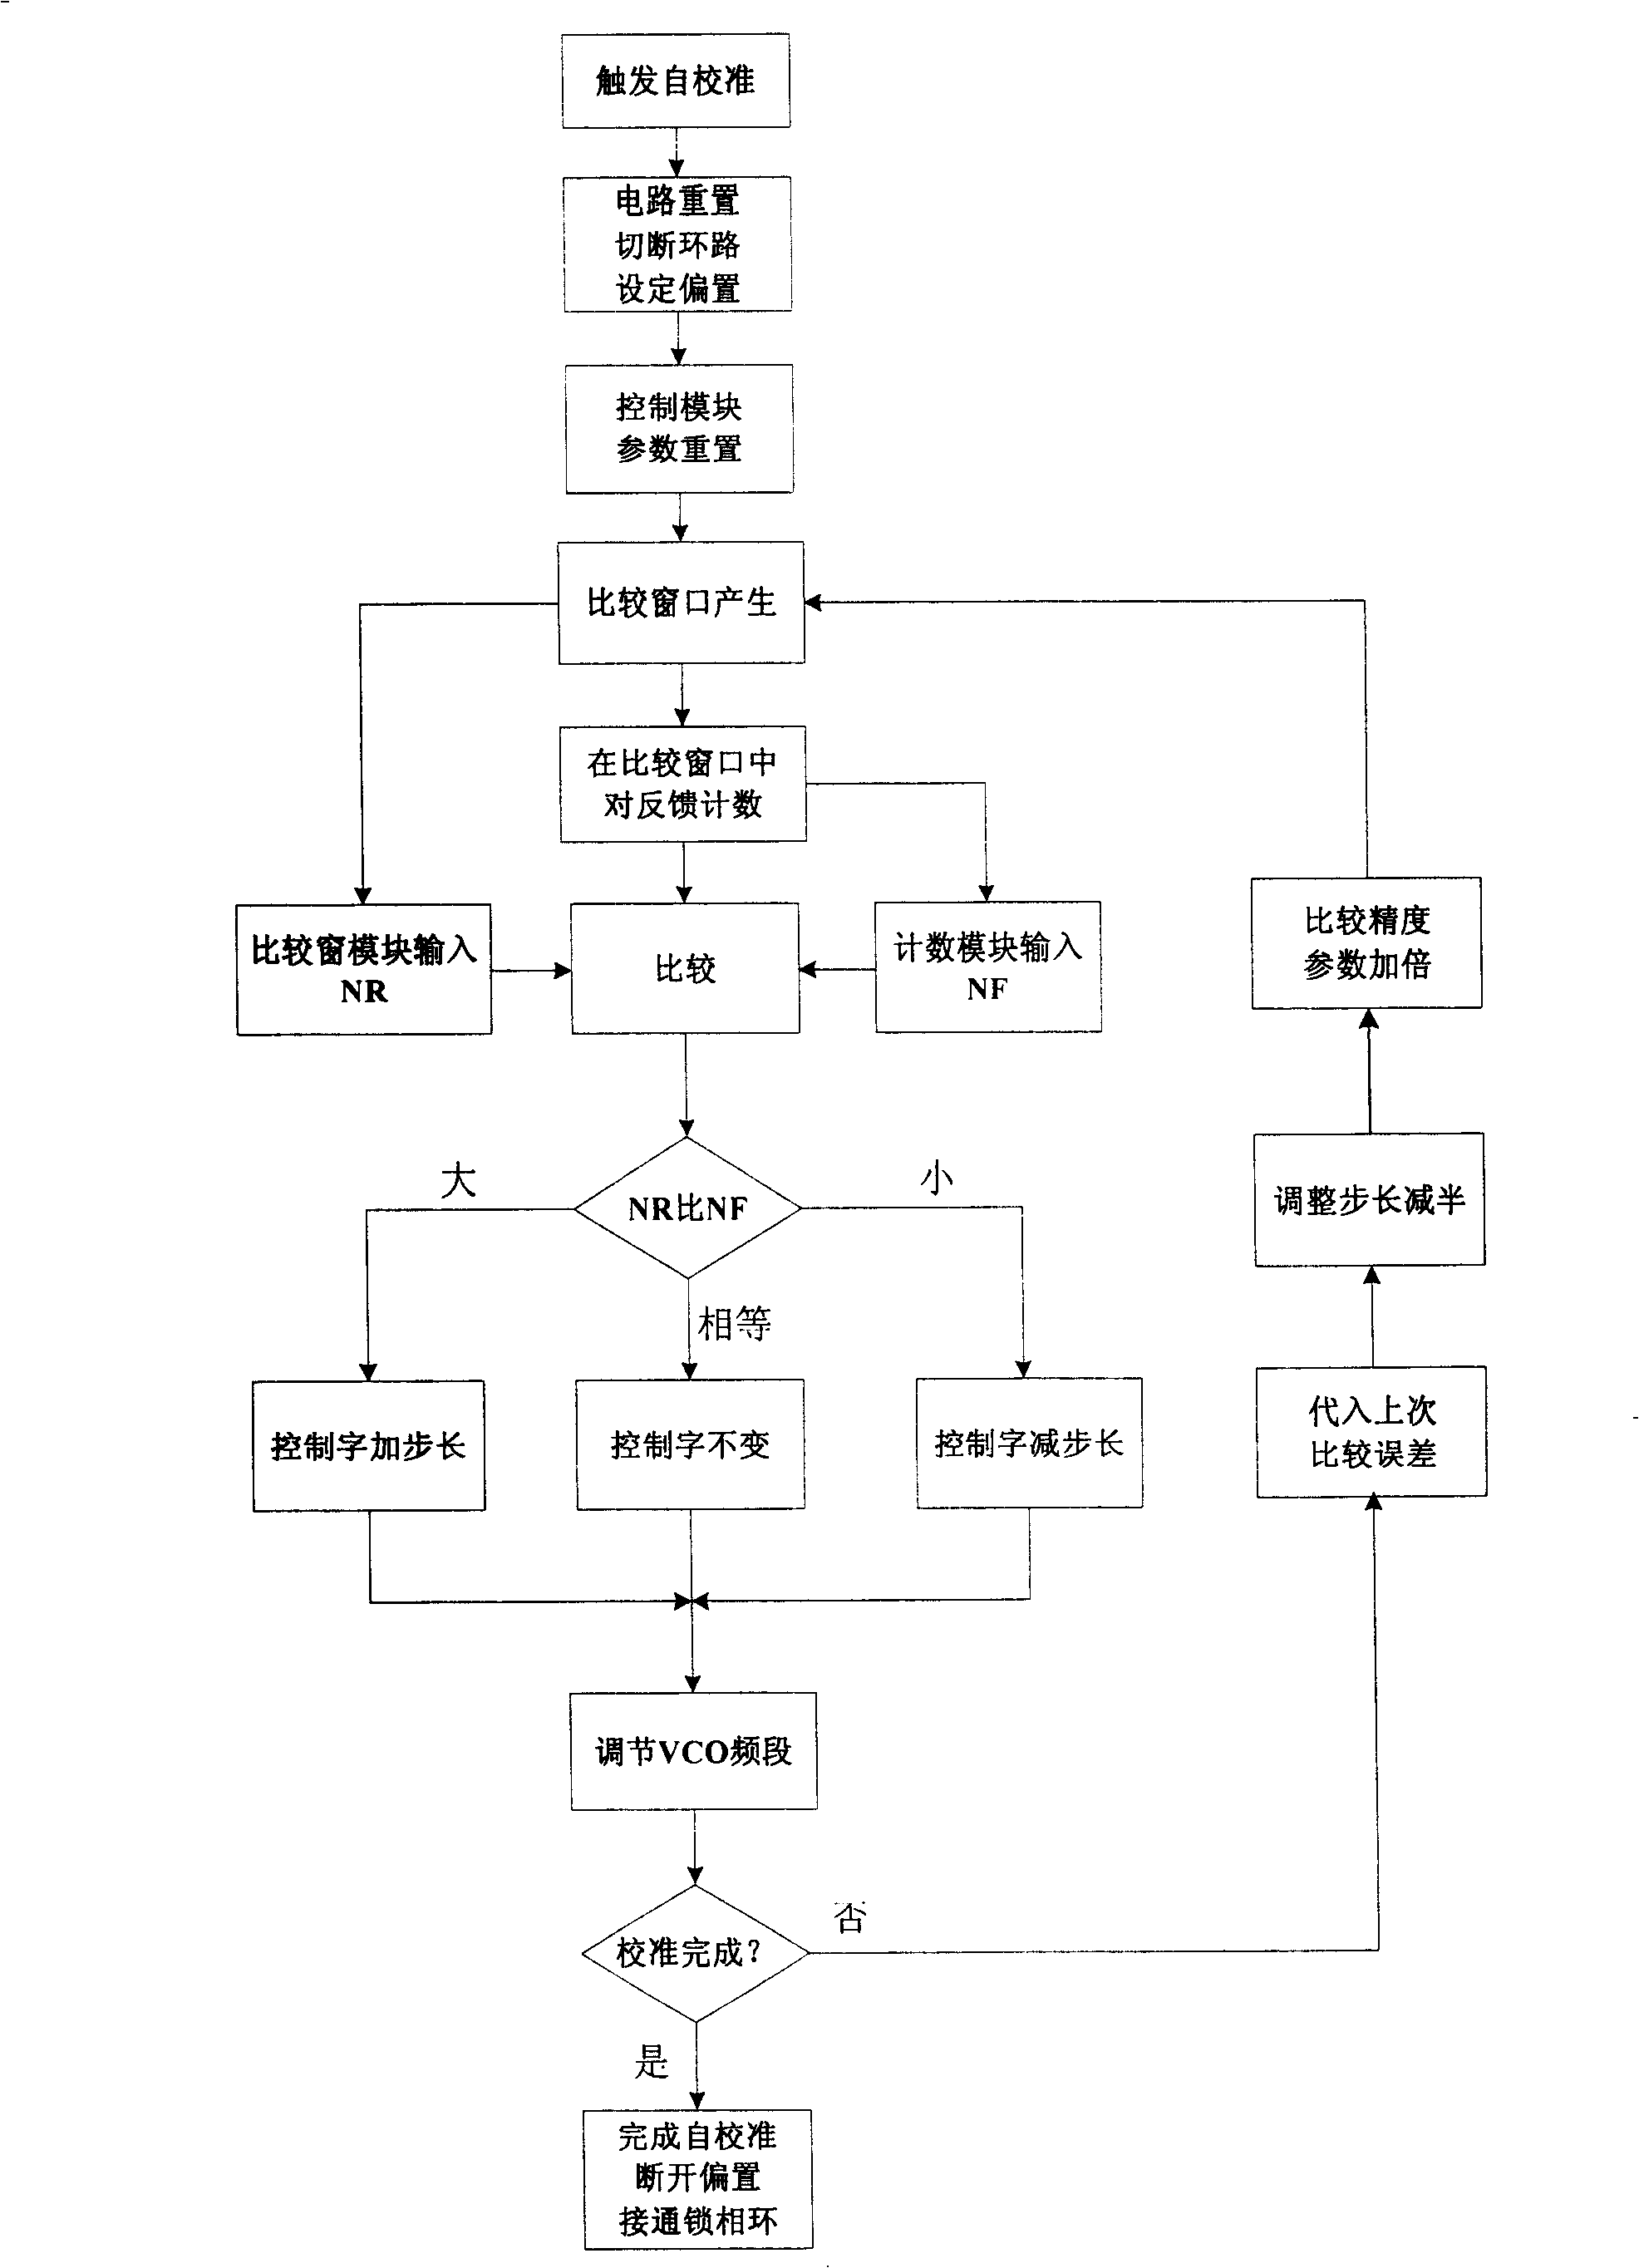 Frequency adjusting method of oscillator and decimal fraction frequency dividing phase-locked loop frequency synthesizer